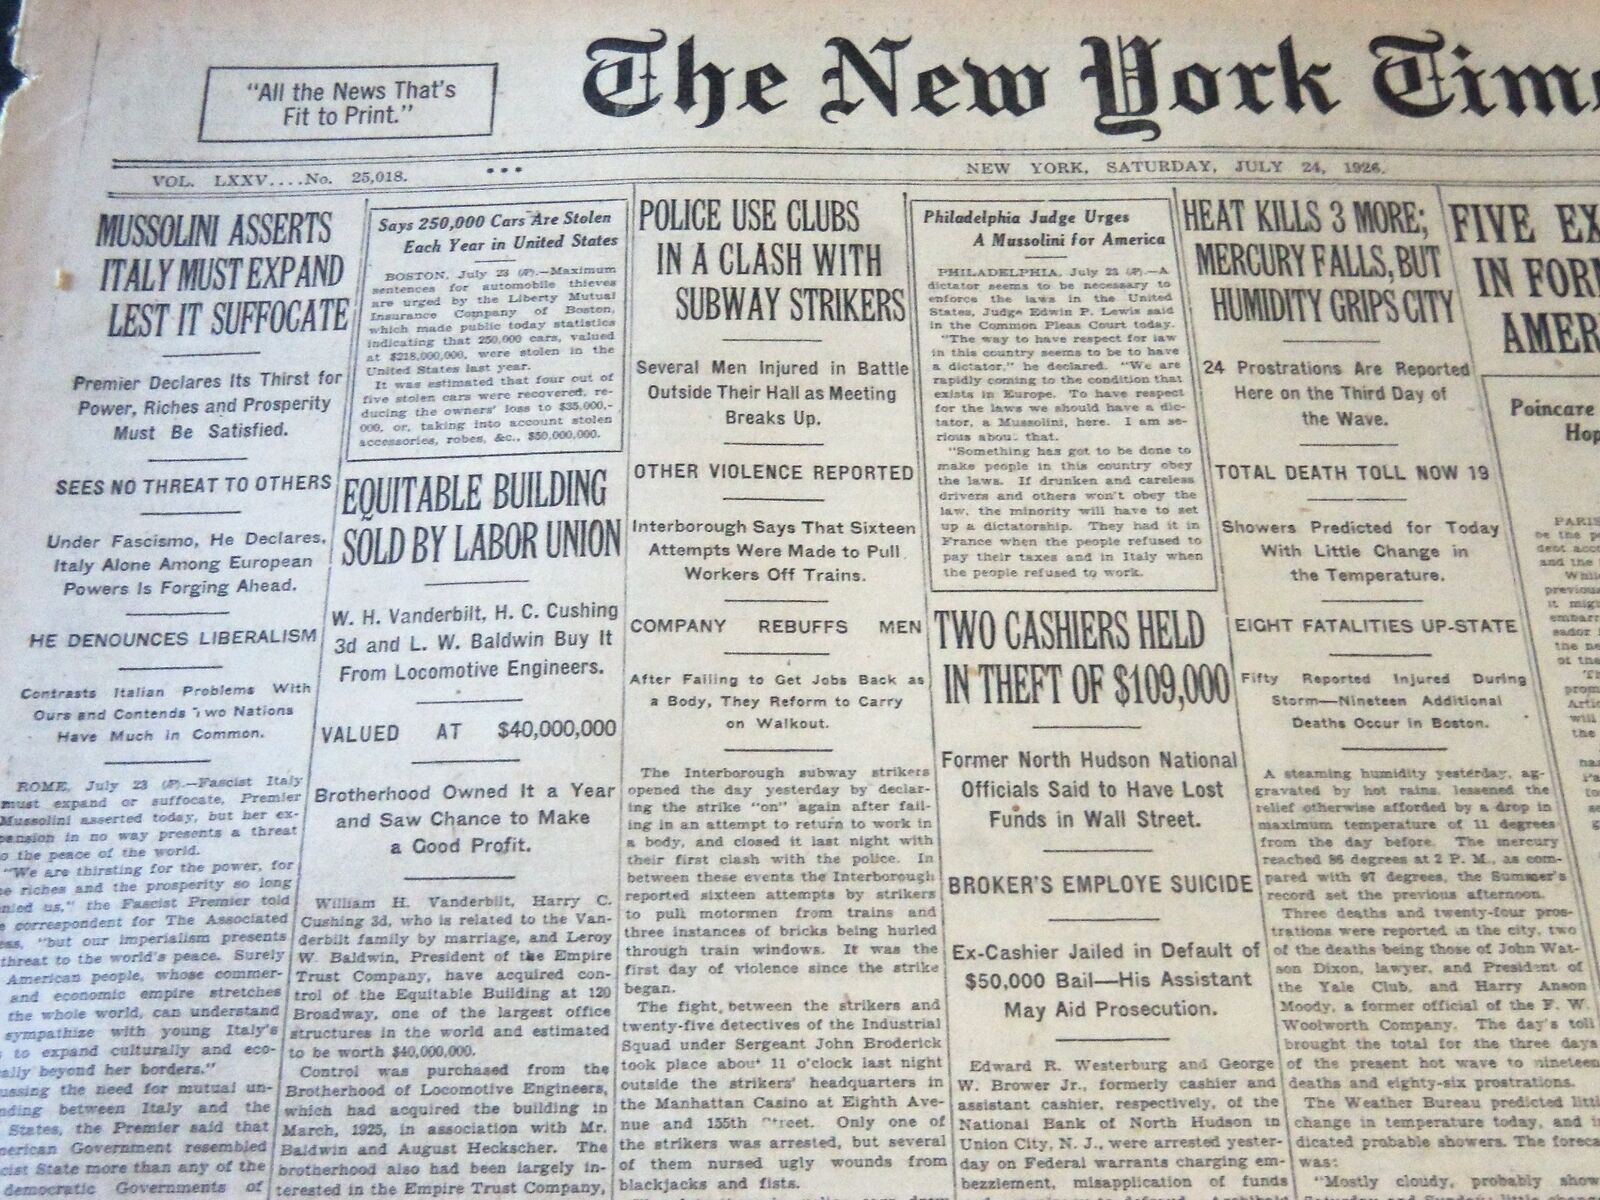 1926 JULY 24 NEW YORK TIMES - EQUITABLE BUILDING SOLD BY LABOR UNION - NT 6592